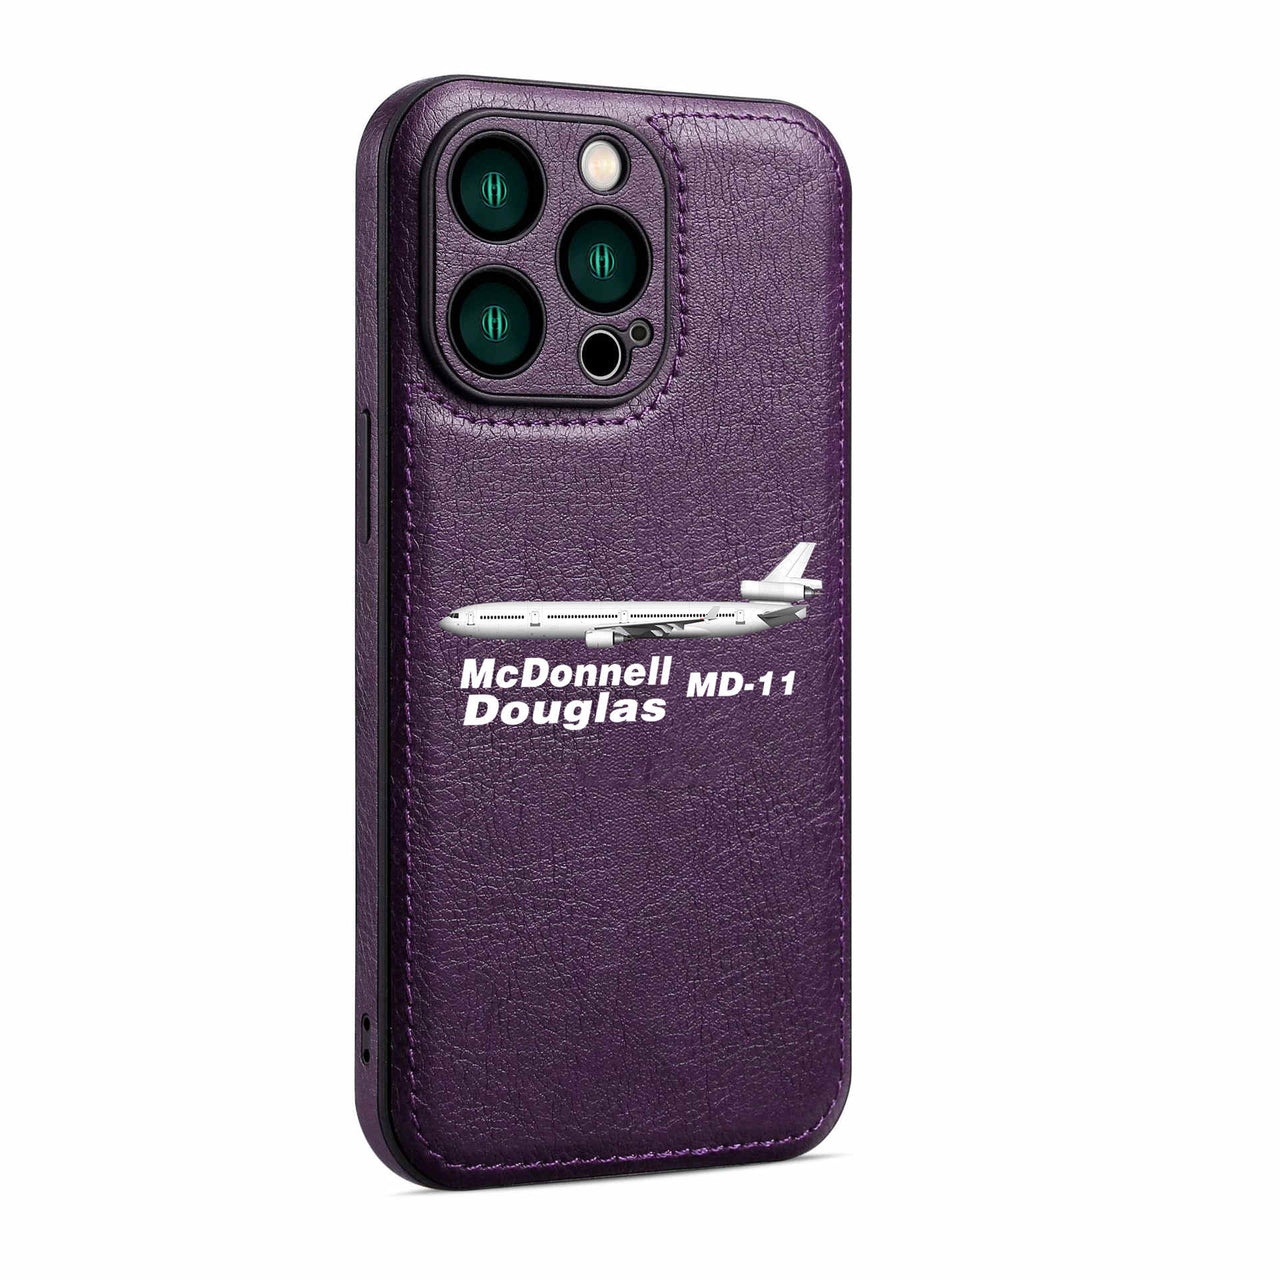 The McDonnell Douglas MD-11 Designed Leather iPhone Cases